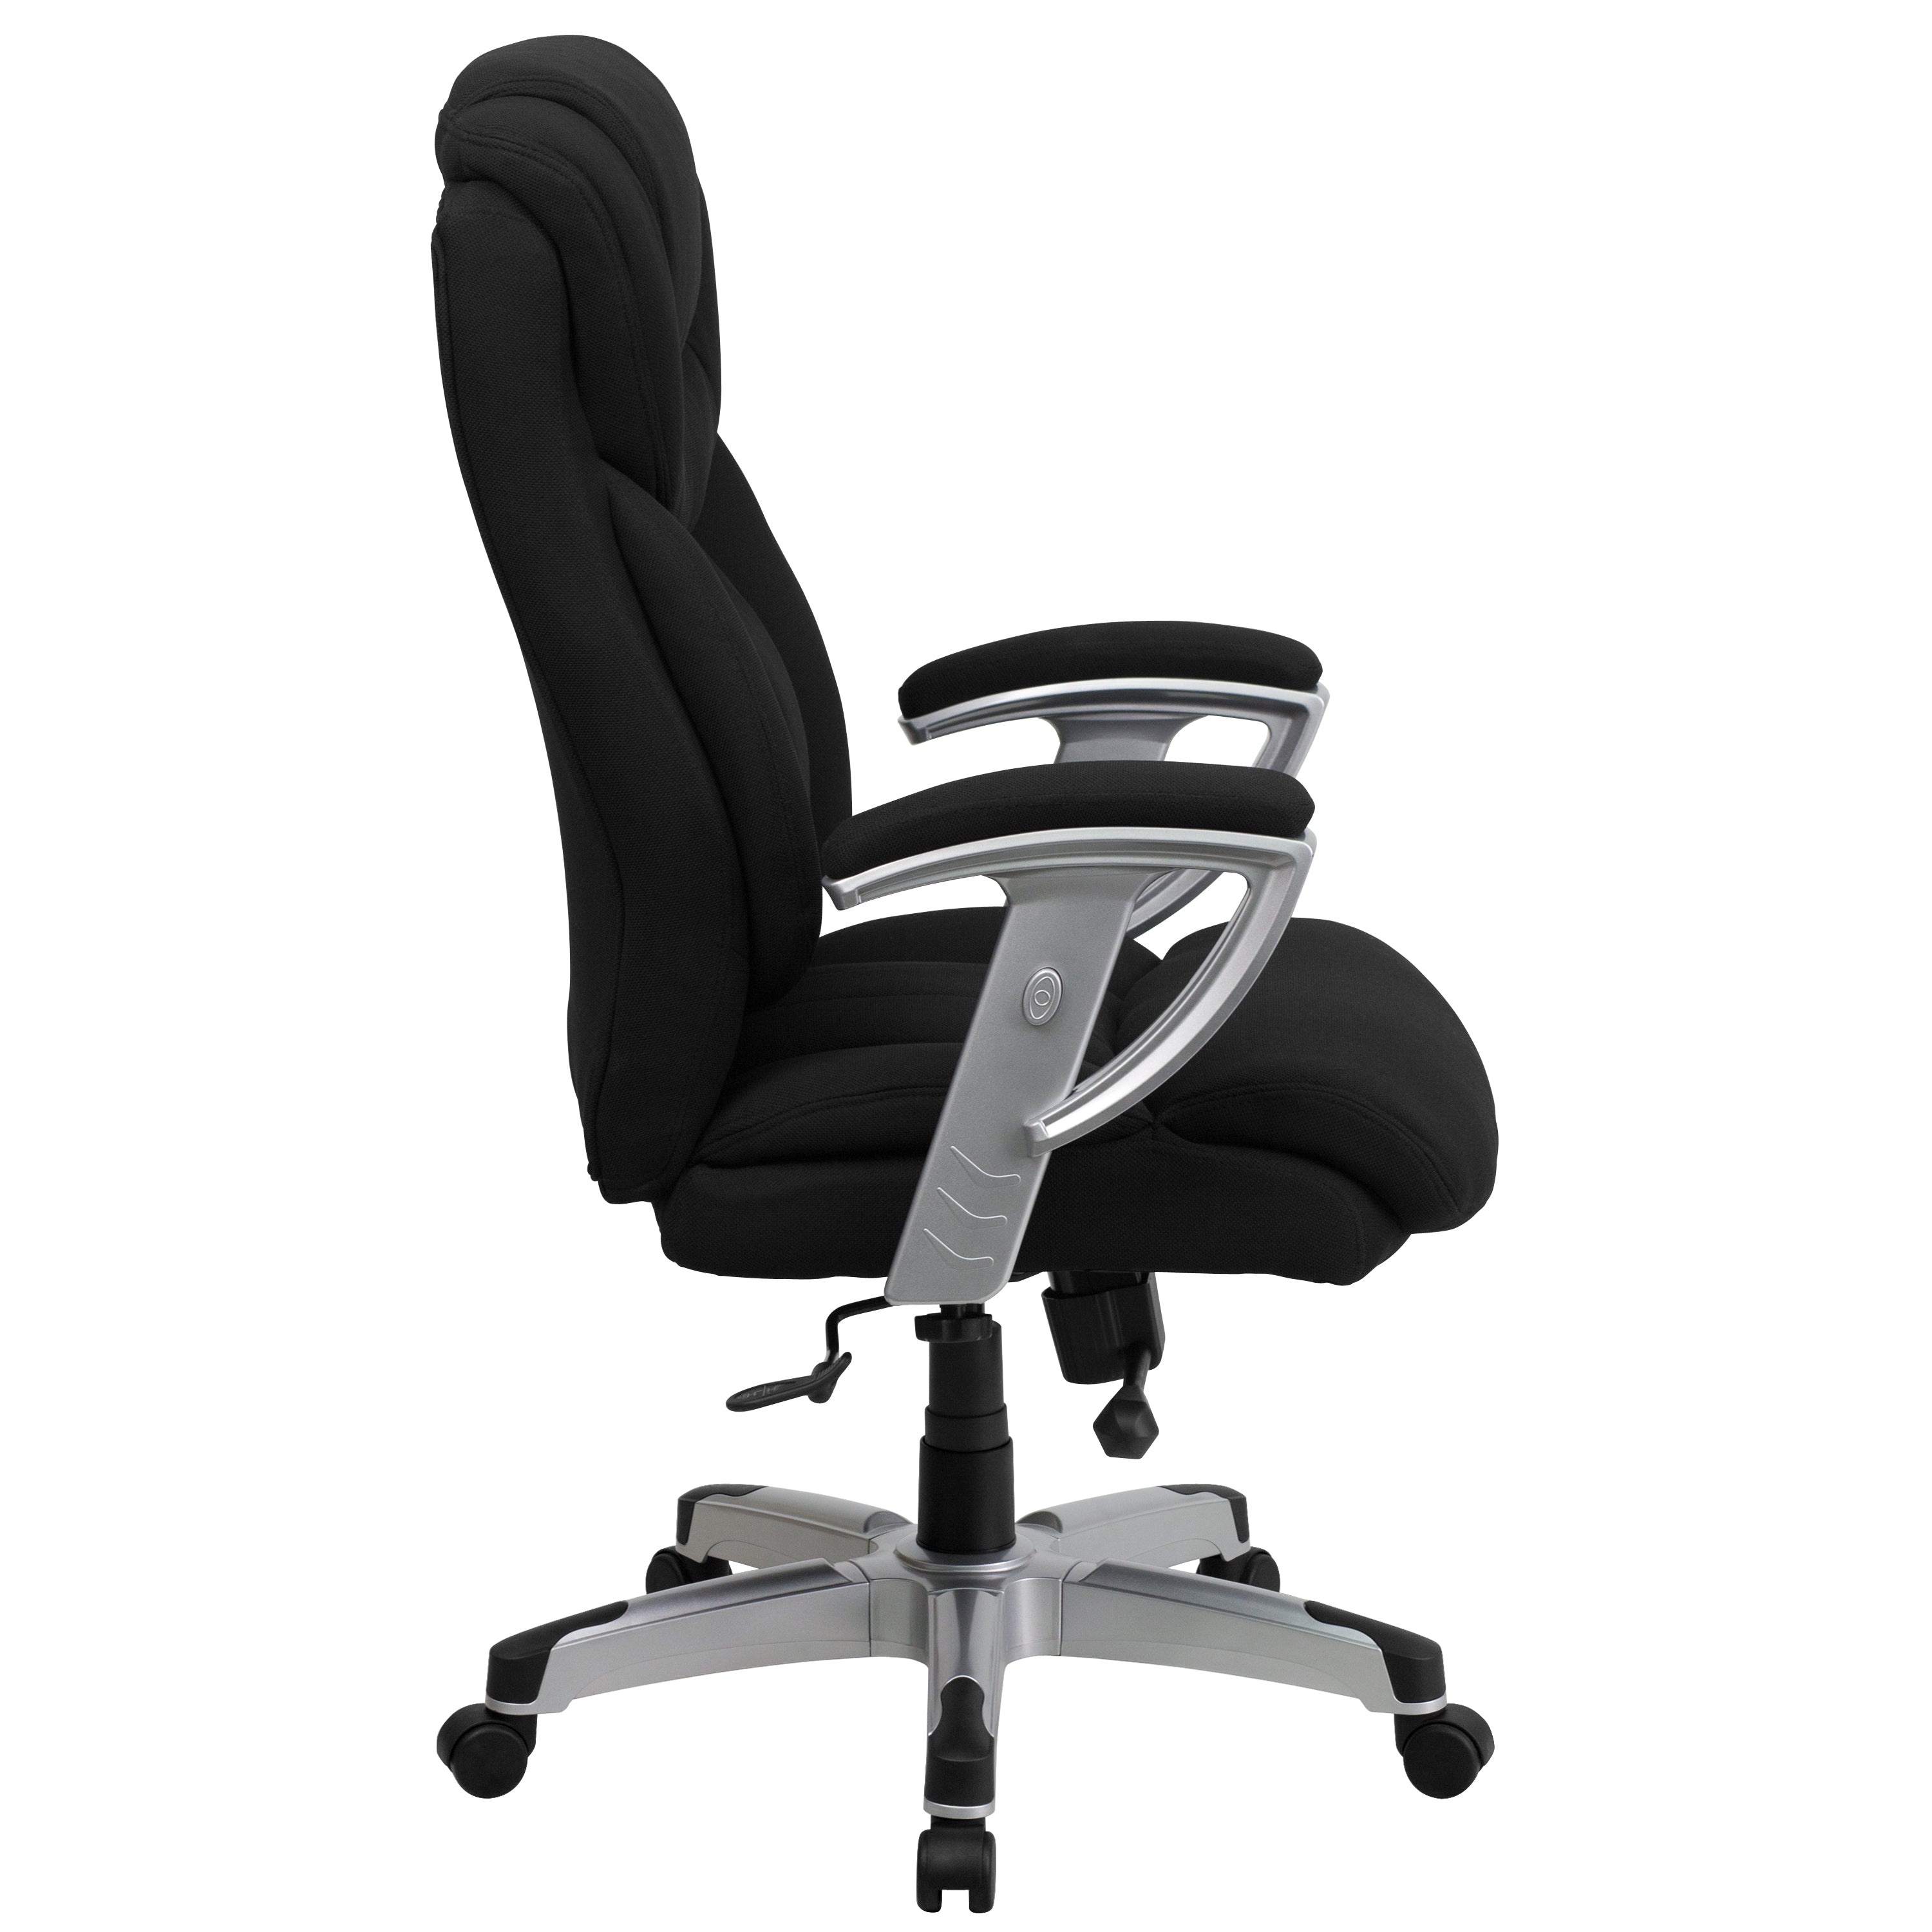 HERCULES Series Big & Tall 400 lb. Rated Executive Swivel Ergonomic Office Chair with Silver Finished Adjustable Arms-Big & Tall Office Chair-Flash Furniture-Wall2Wall Furnishings